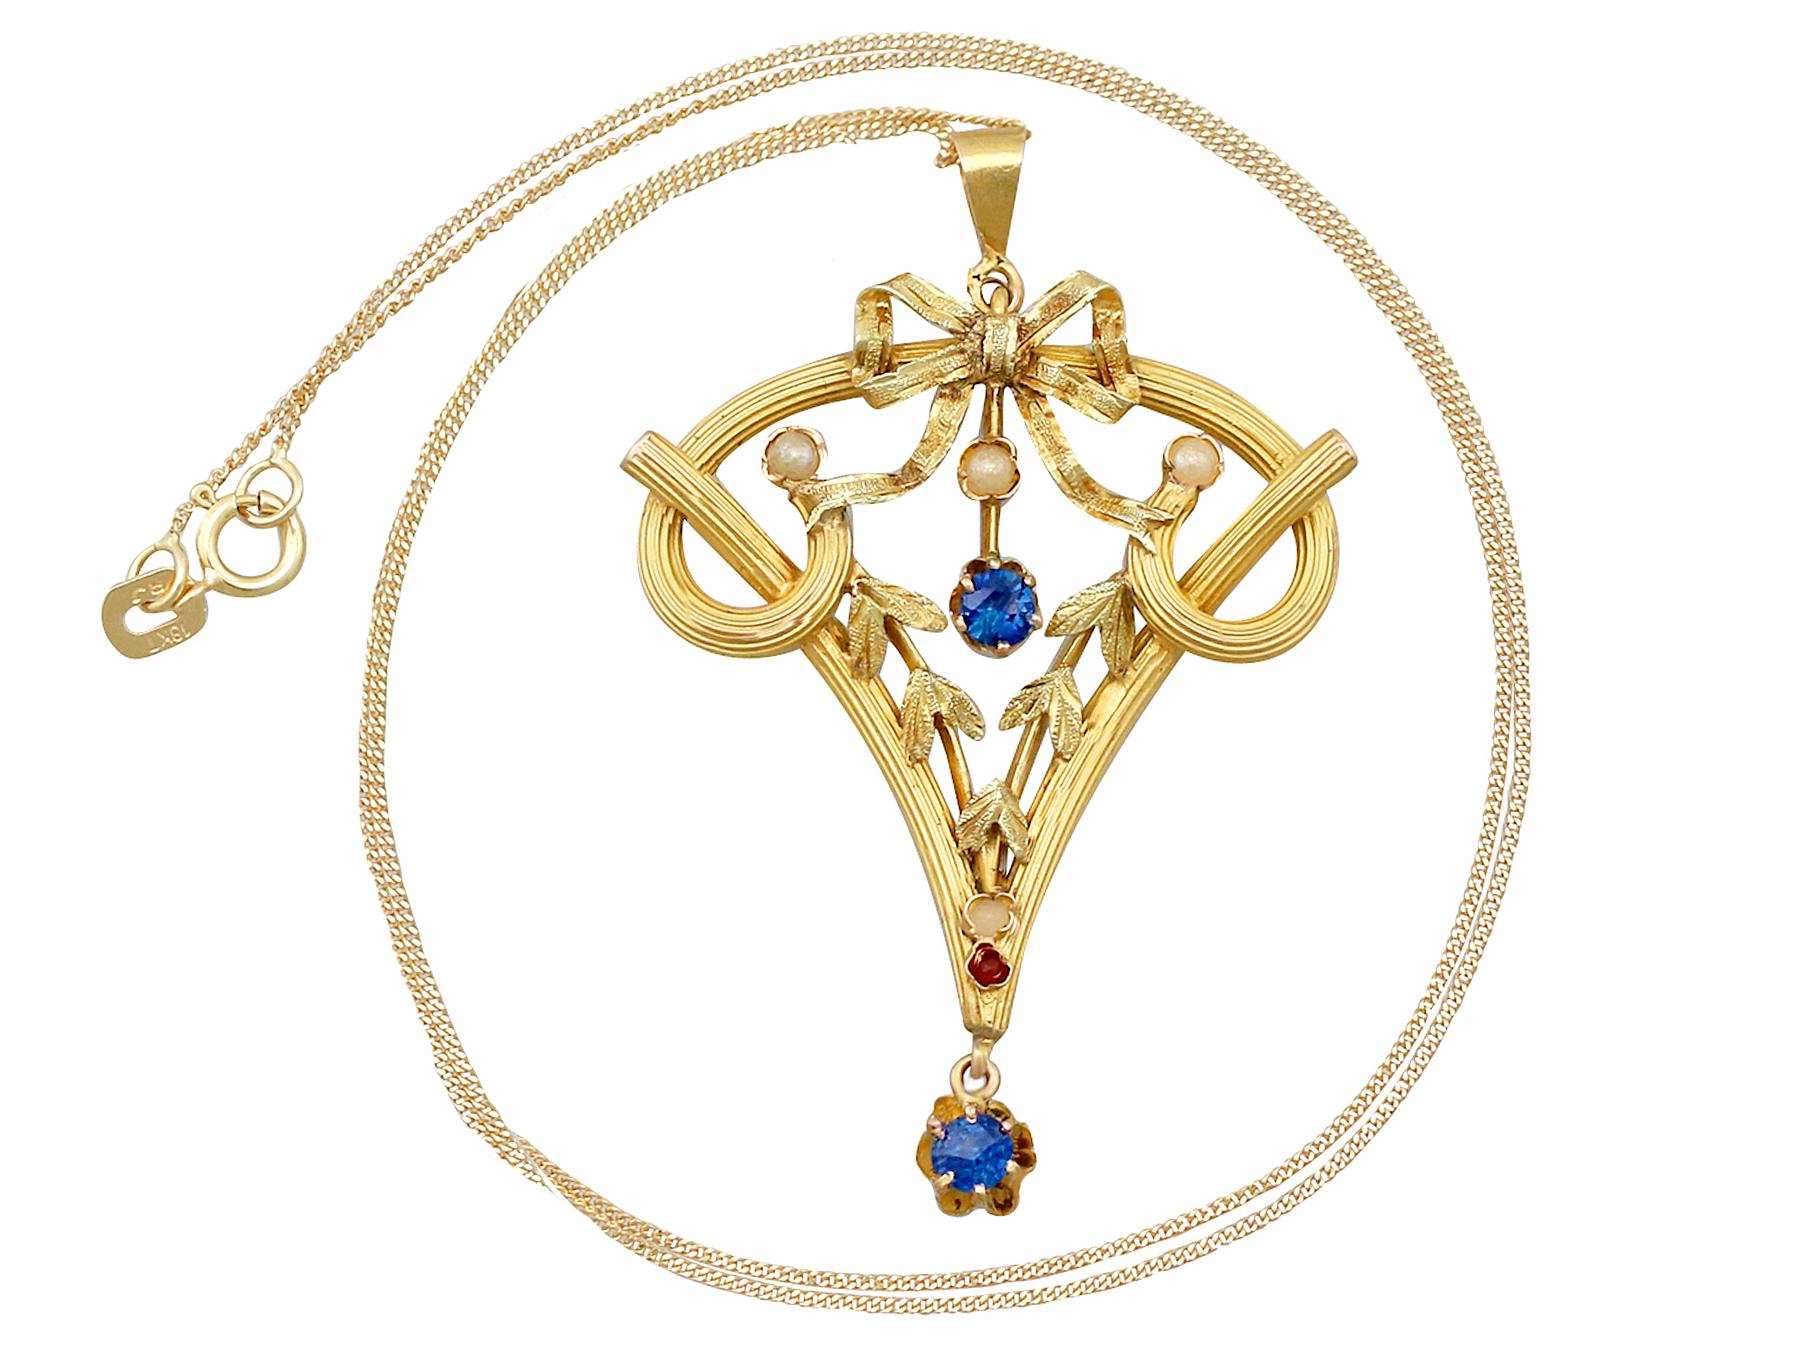 An impressive antique 0.12 carat ruby and sapphire, seed pearl and 21 karat yellow gold pendant; part of our diverse Art Nouveau jewelry collections.

This fine and impressive antique Art Nouveau pendant has been crafted in 21k yellow gold.

The